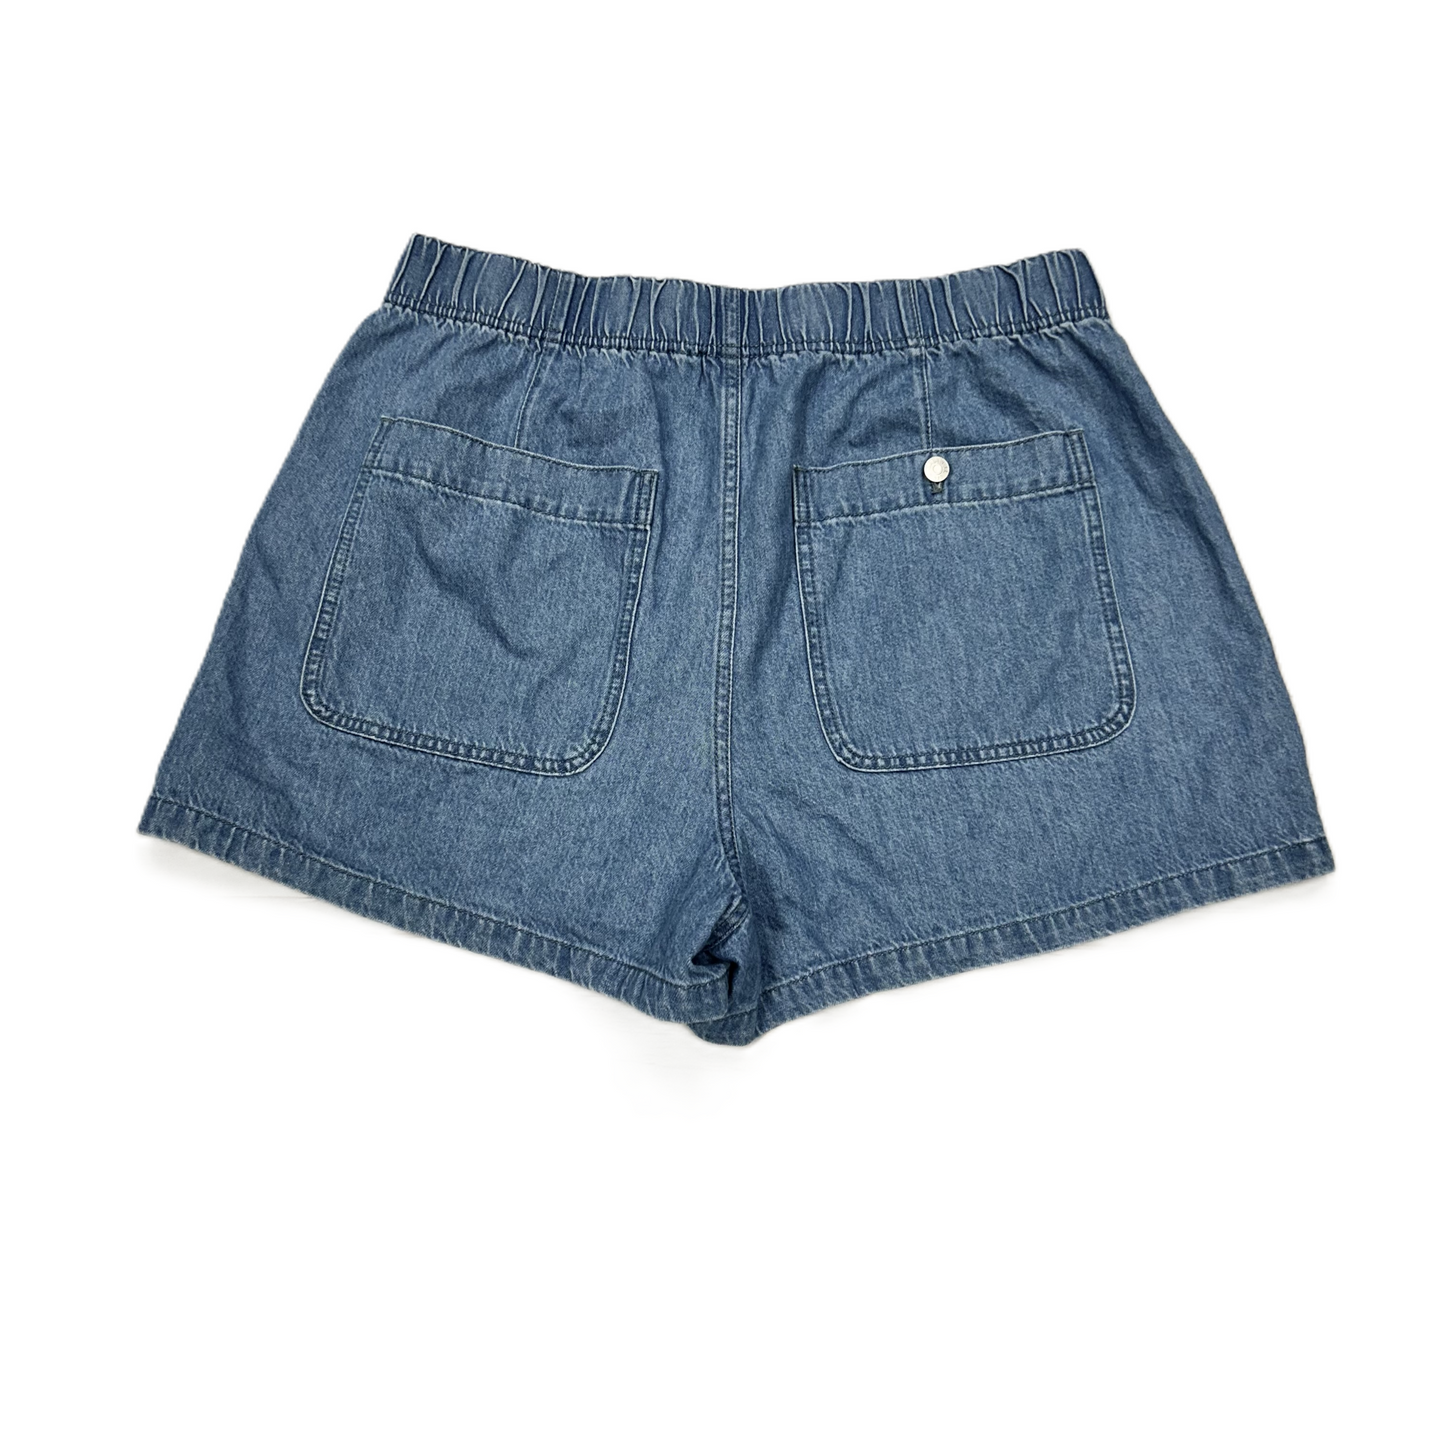 Blue Denim Shorts By Madewell, Size: 12